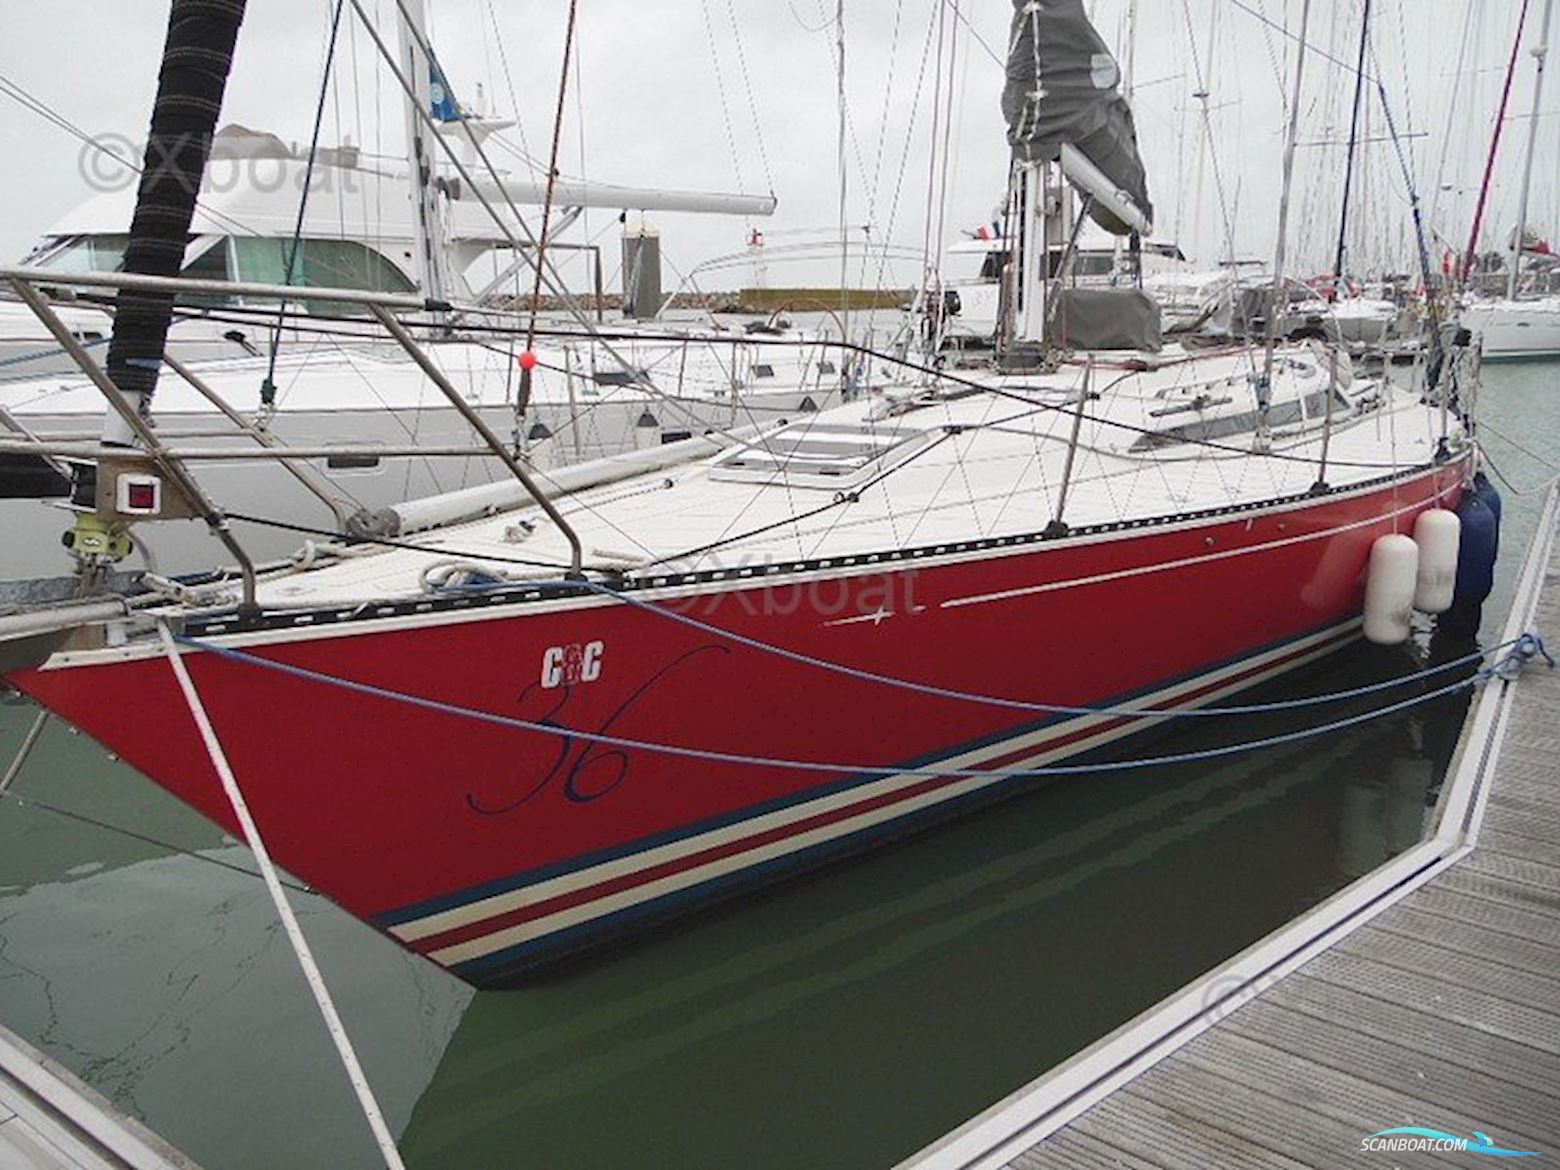 C&C YACHTS 37/40 XL Sailing boat 1991, with LOMBARDINI engine, France